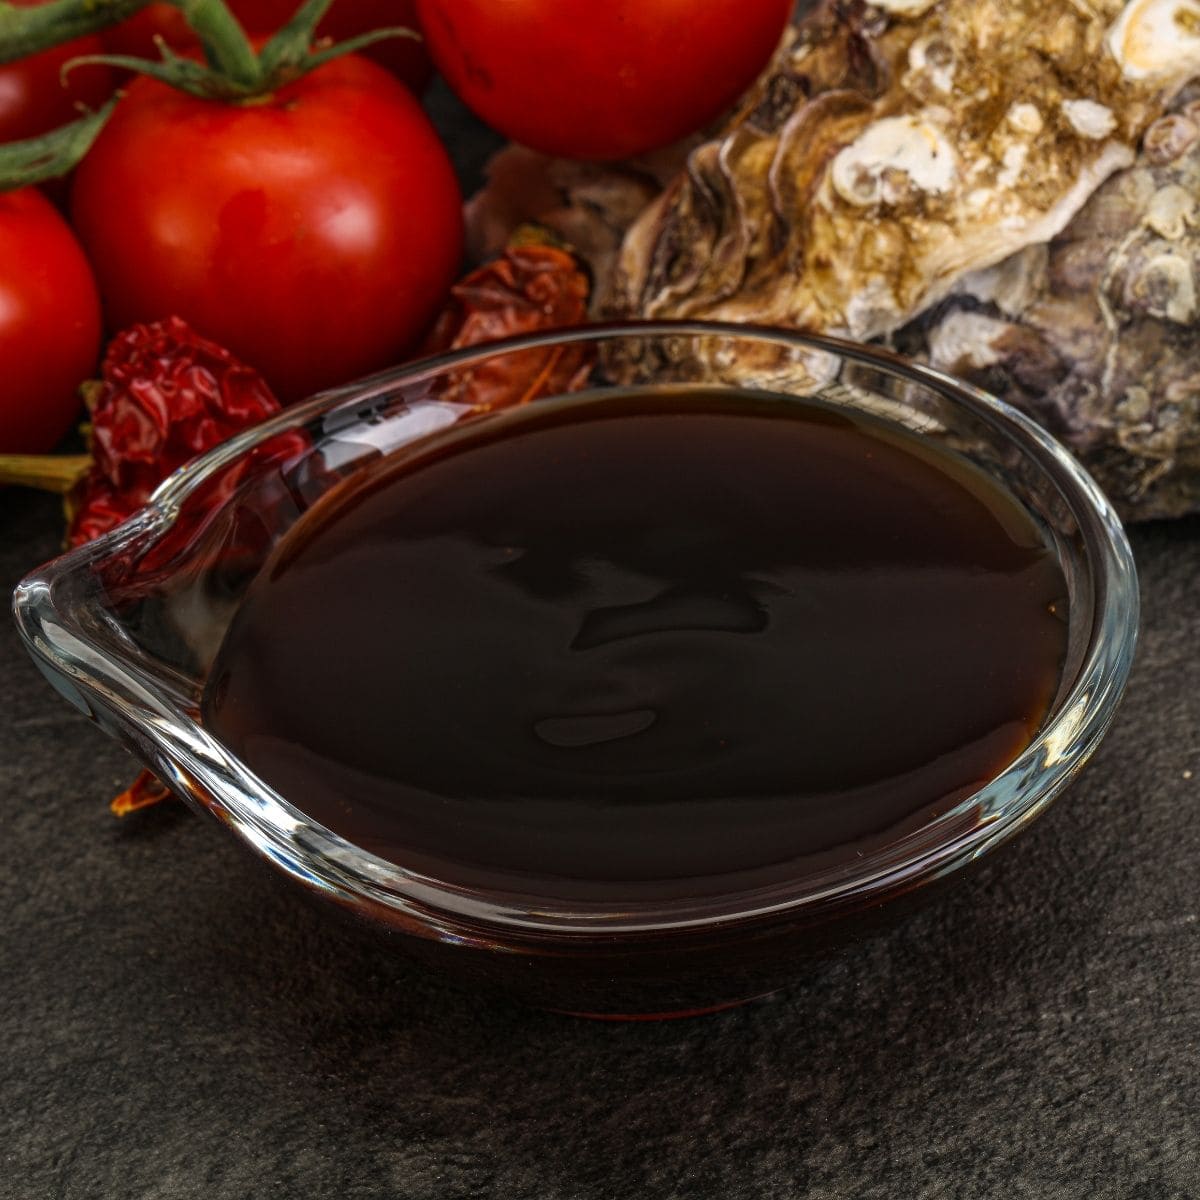 8 Best Oyster Sauce Substitutes - Insanely Good Recipes